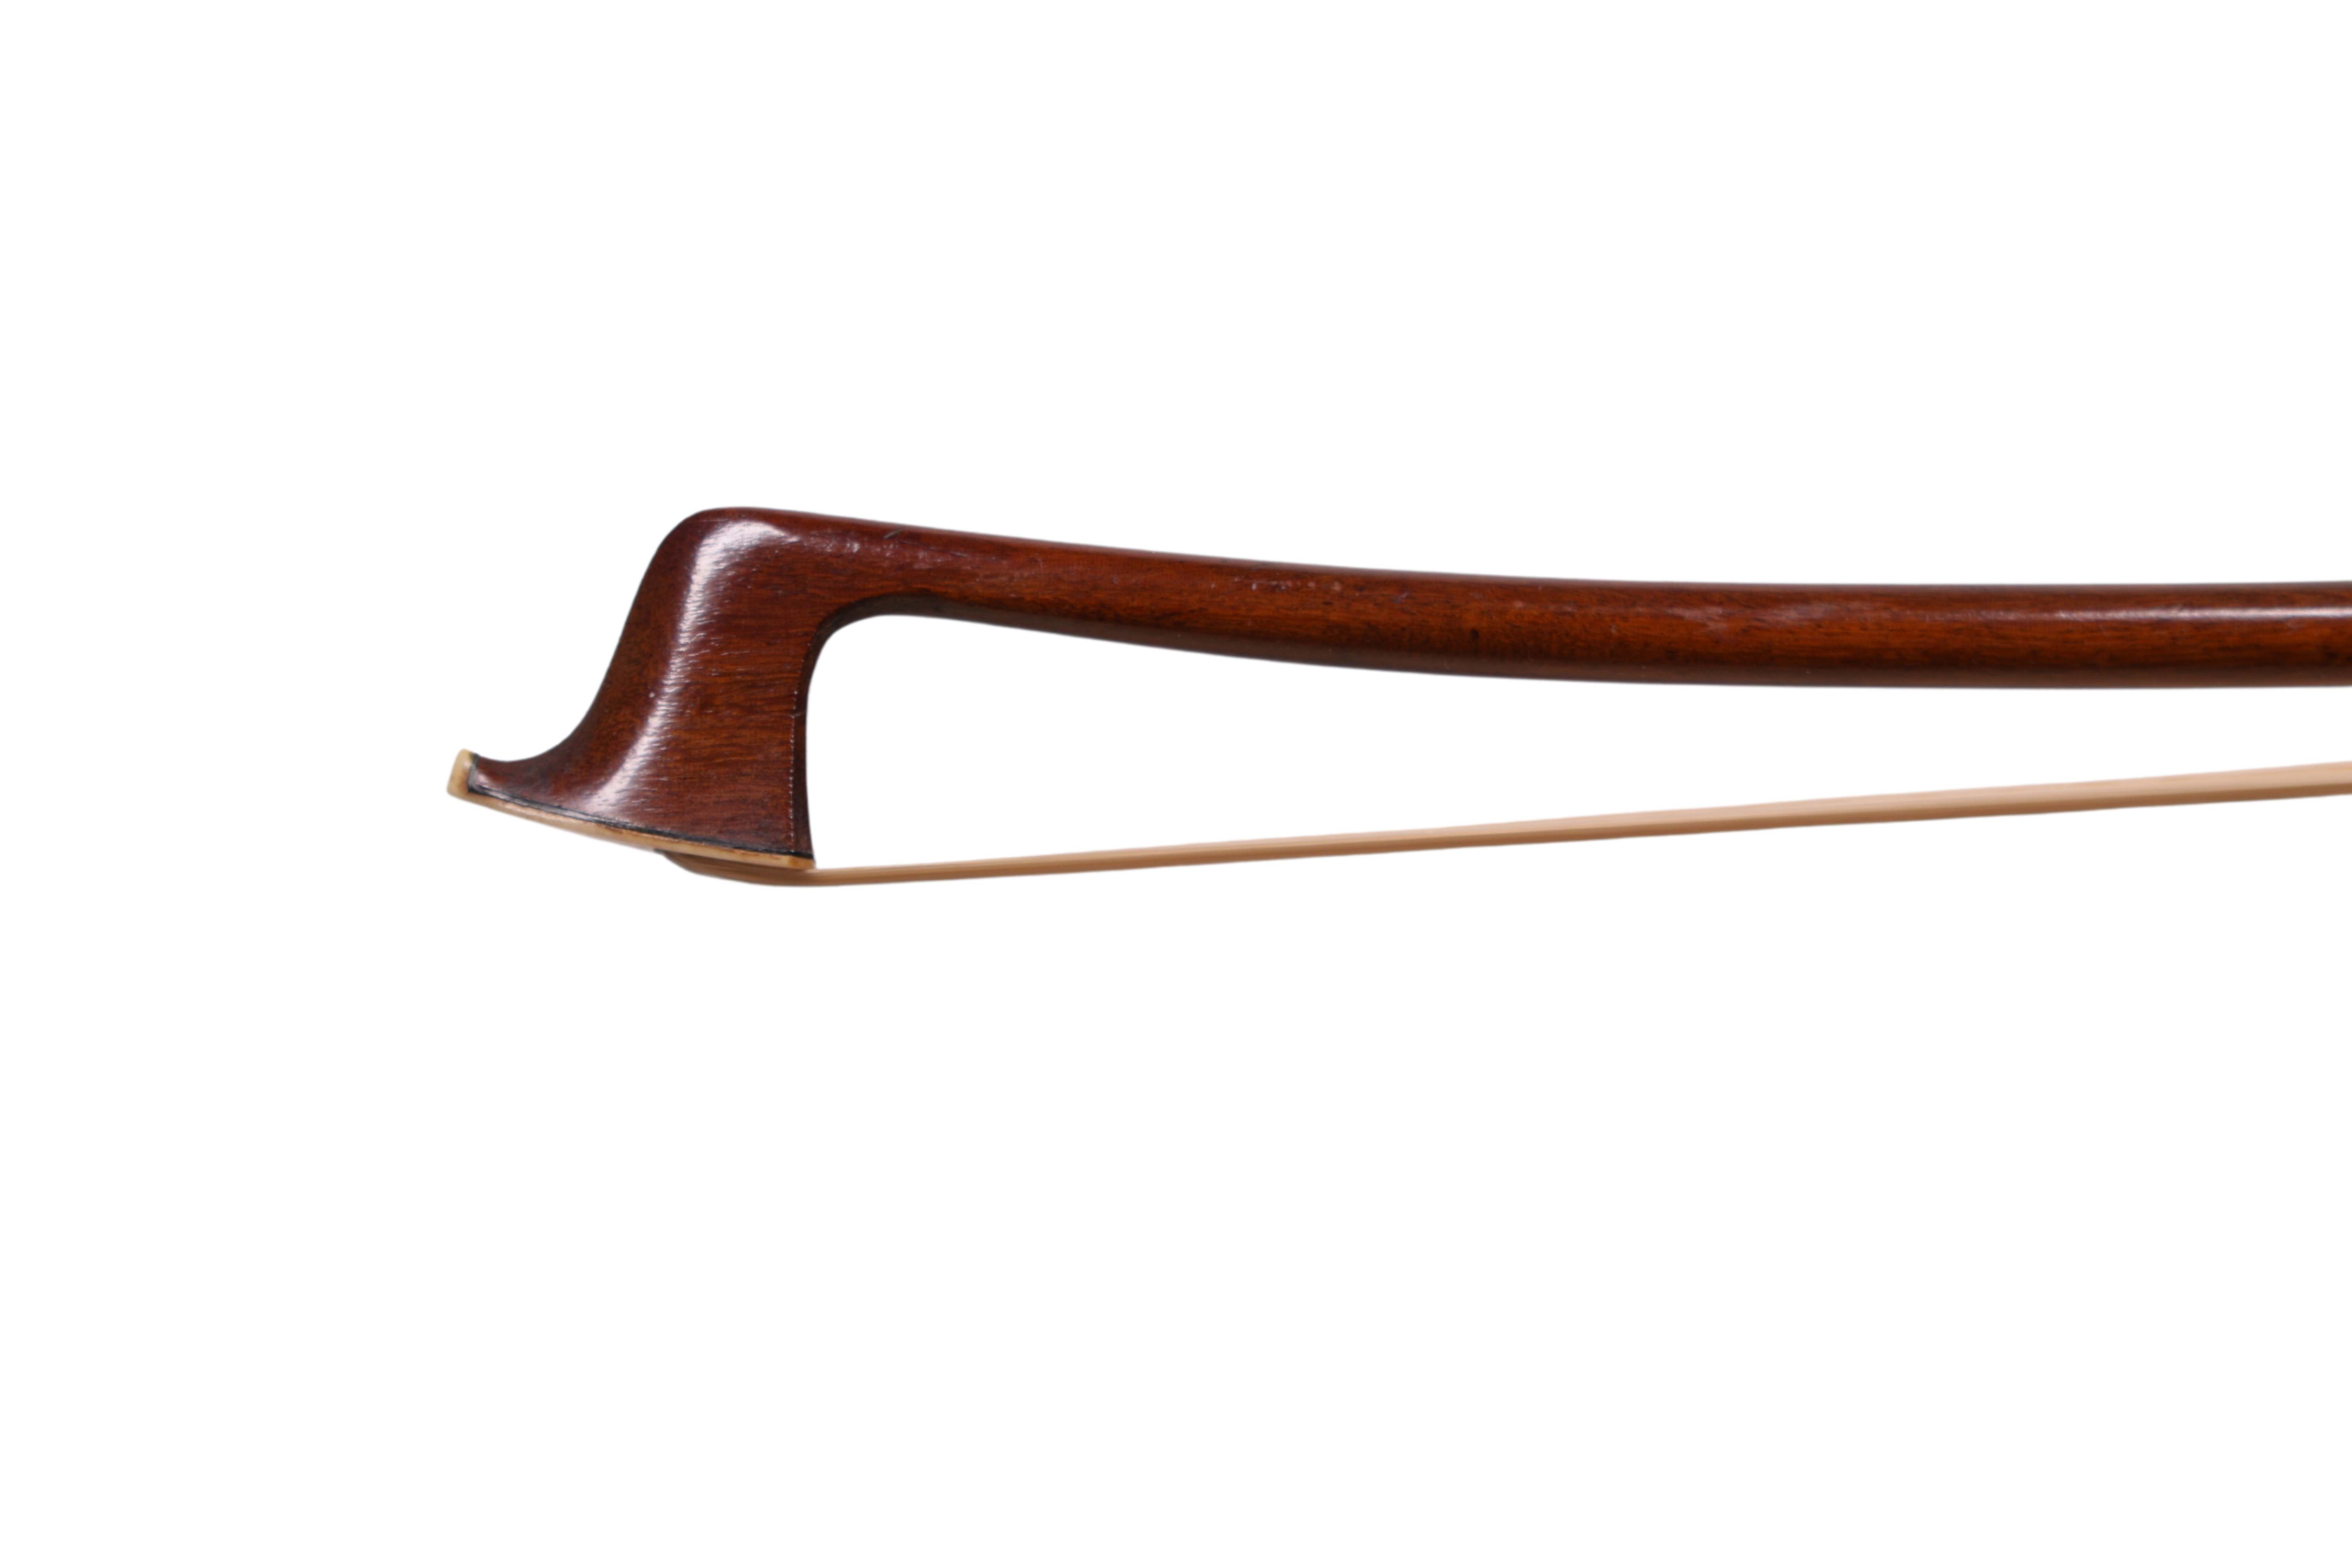  Viola bow from the J.T.L. workshop, Mirecourt, circa 1920